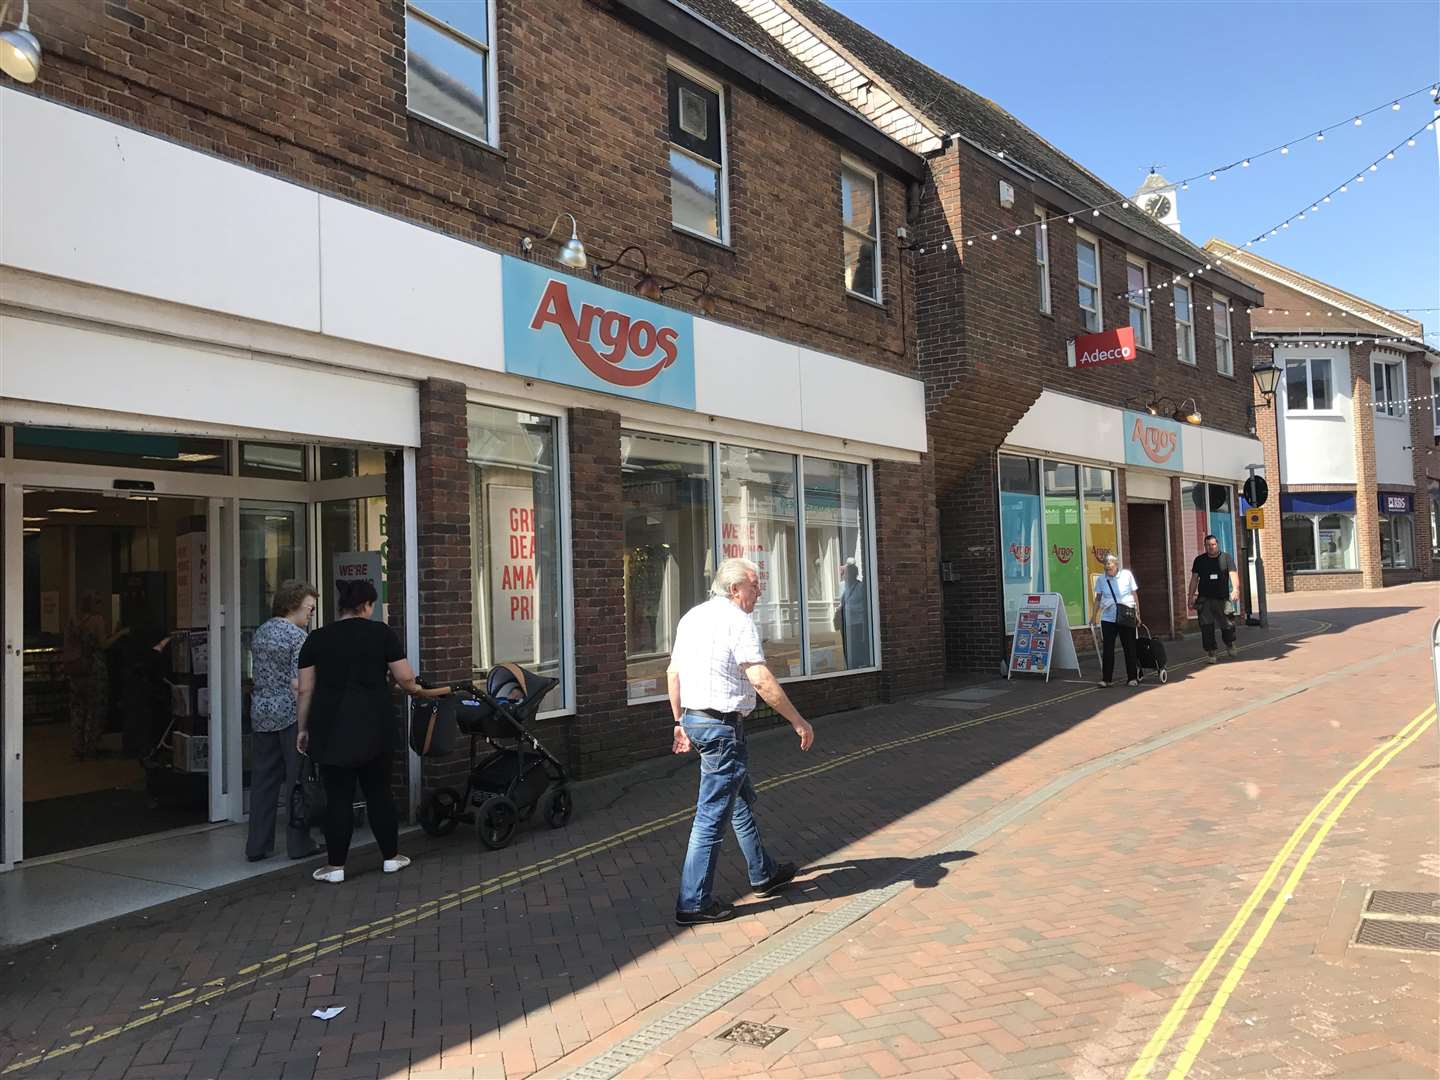 Argos is leaving the town centre